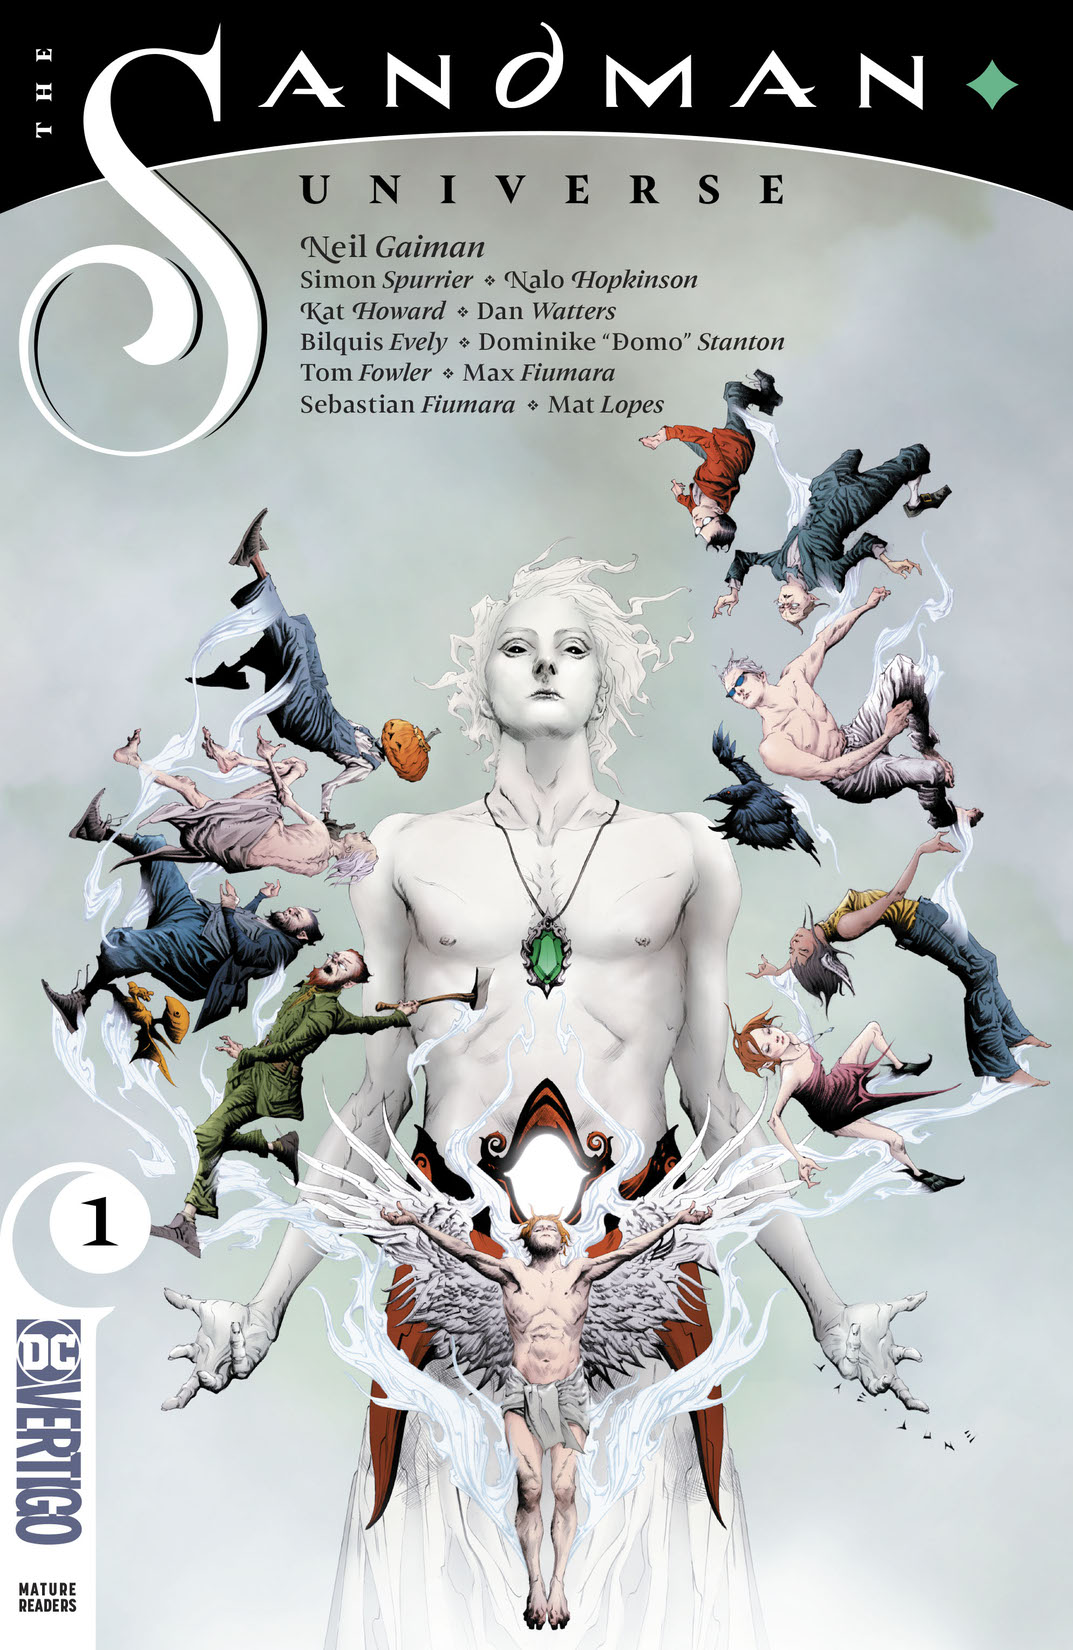 The Sandman Universe #1 preview images